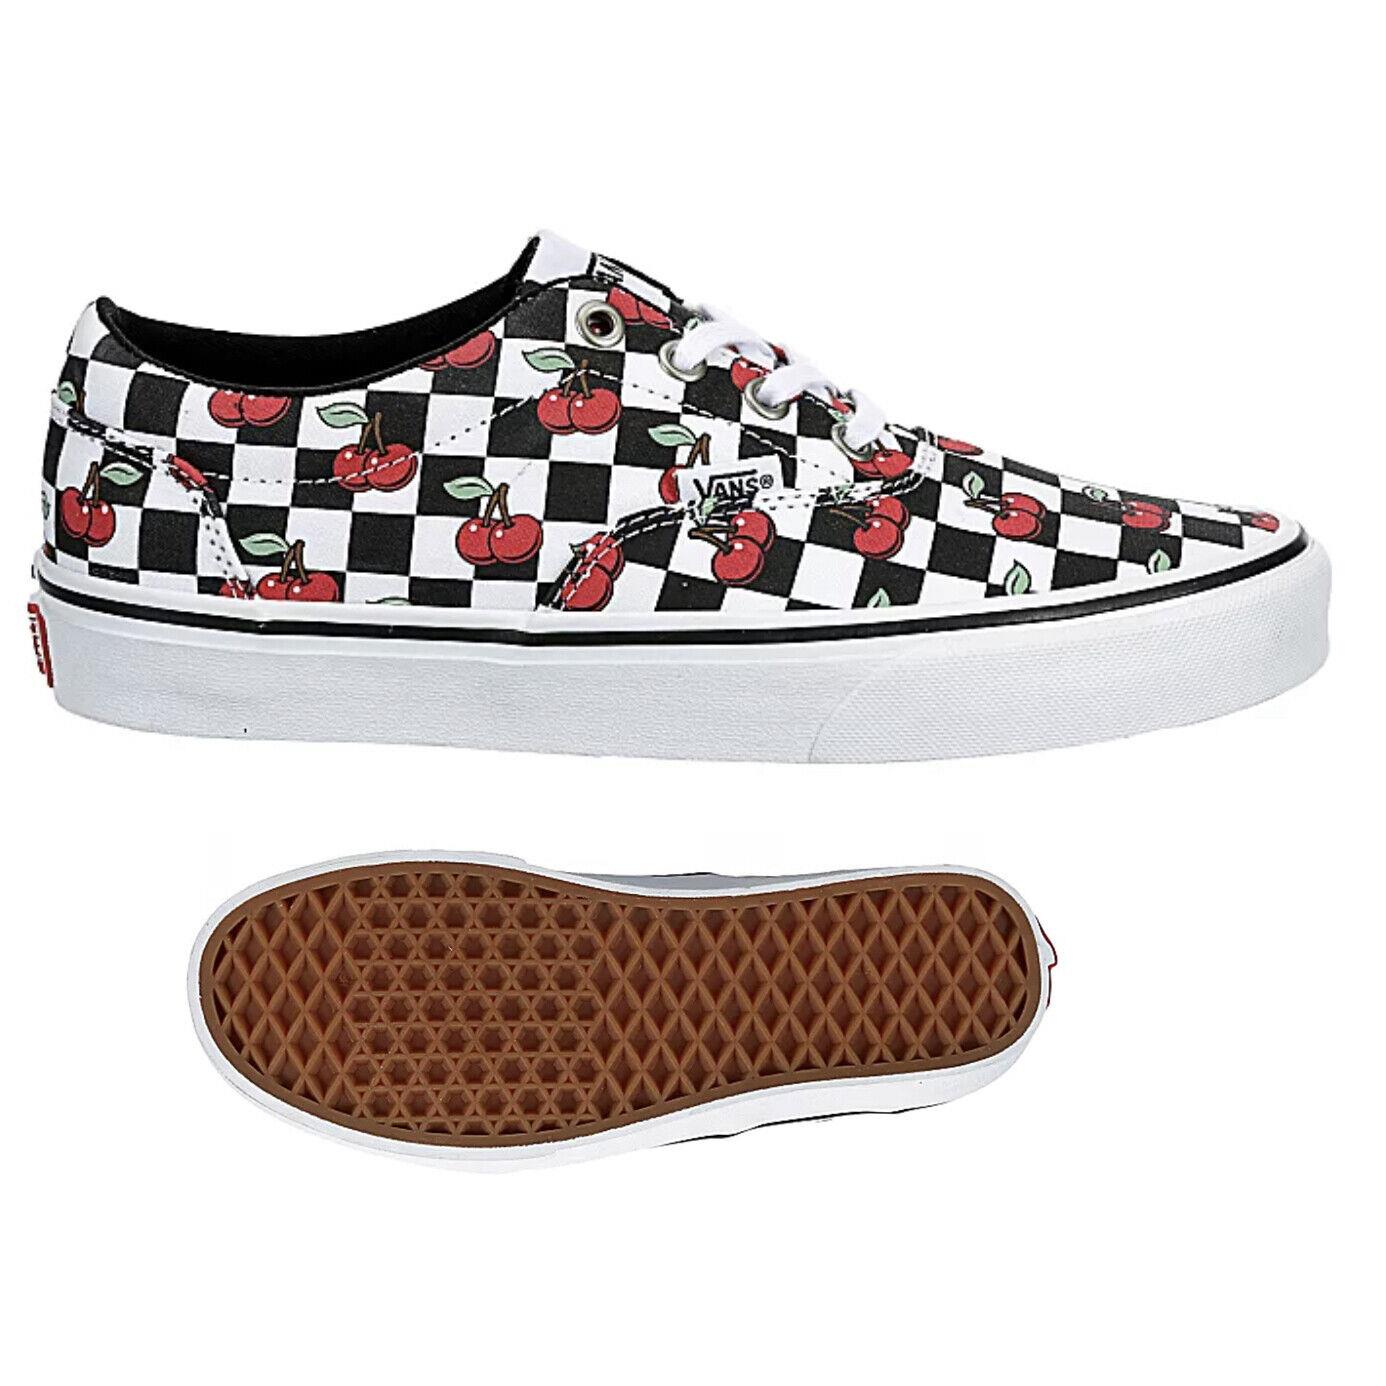 Vans Cherry Checkered Lace Up Casual Women`s Sneakers Shoes All Sizes - Multicolor